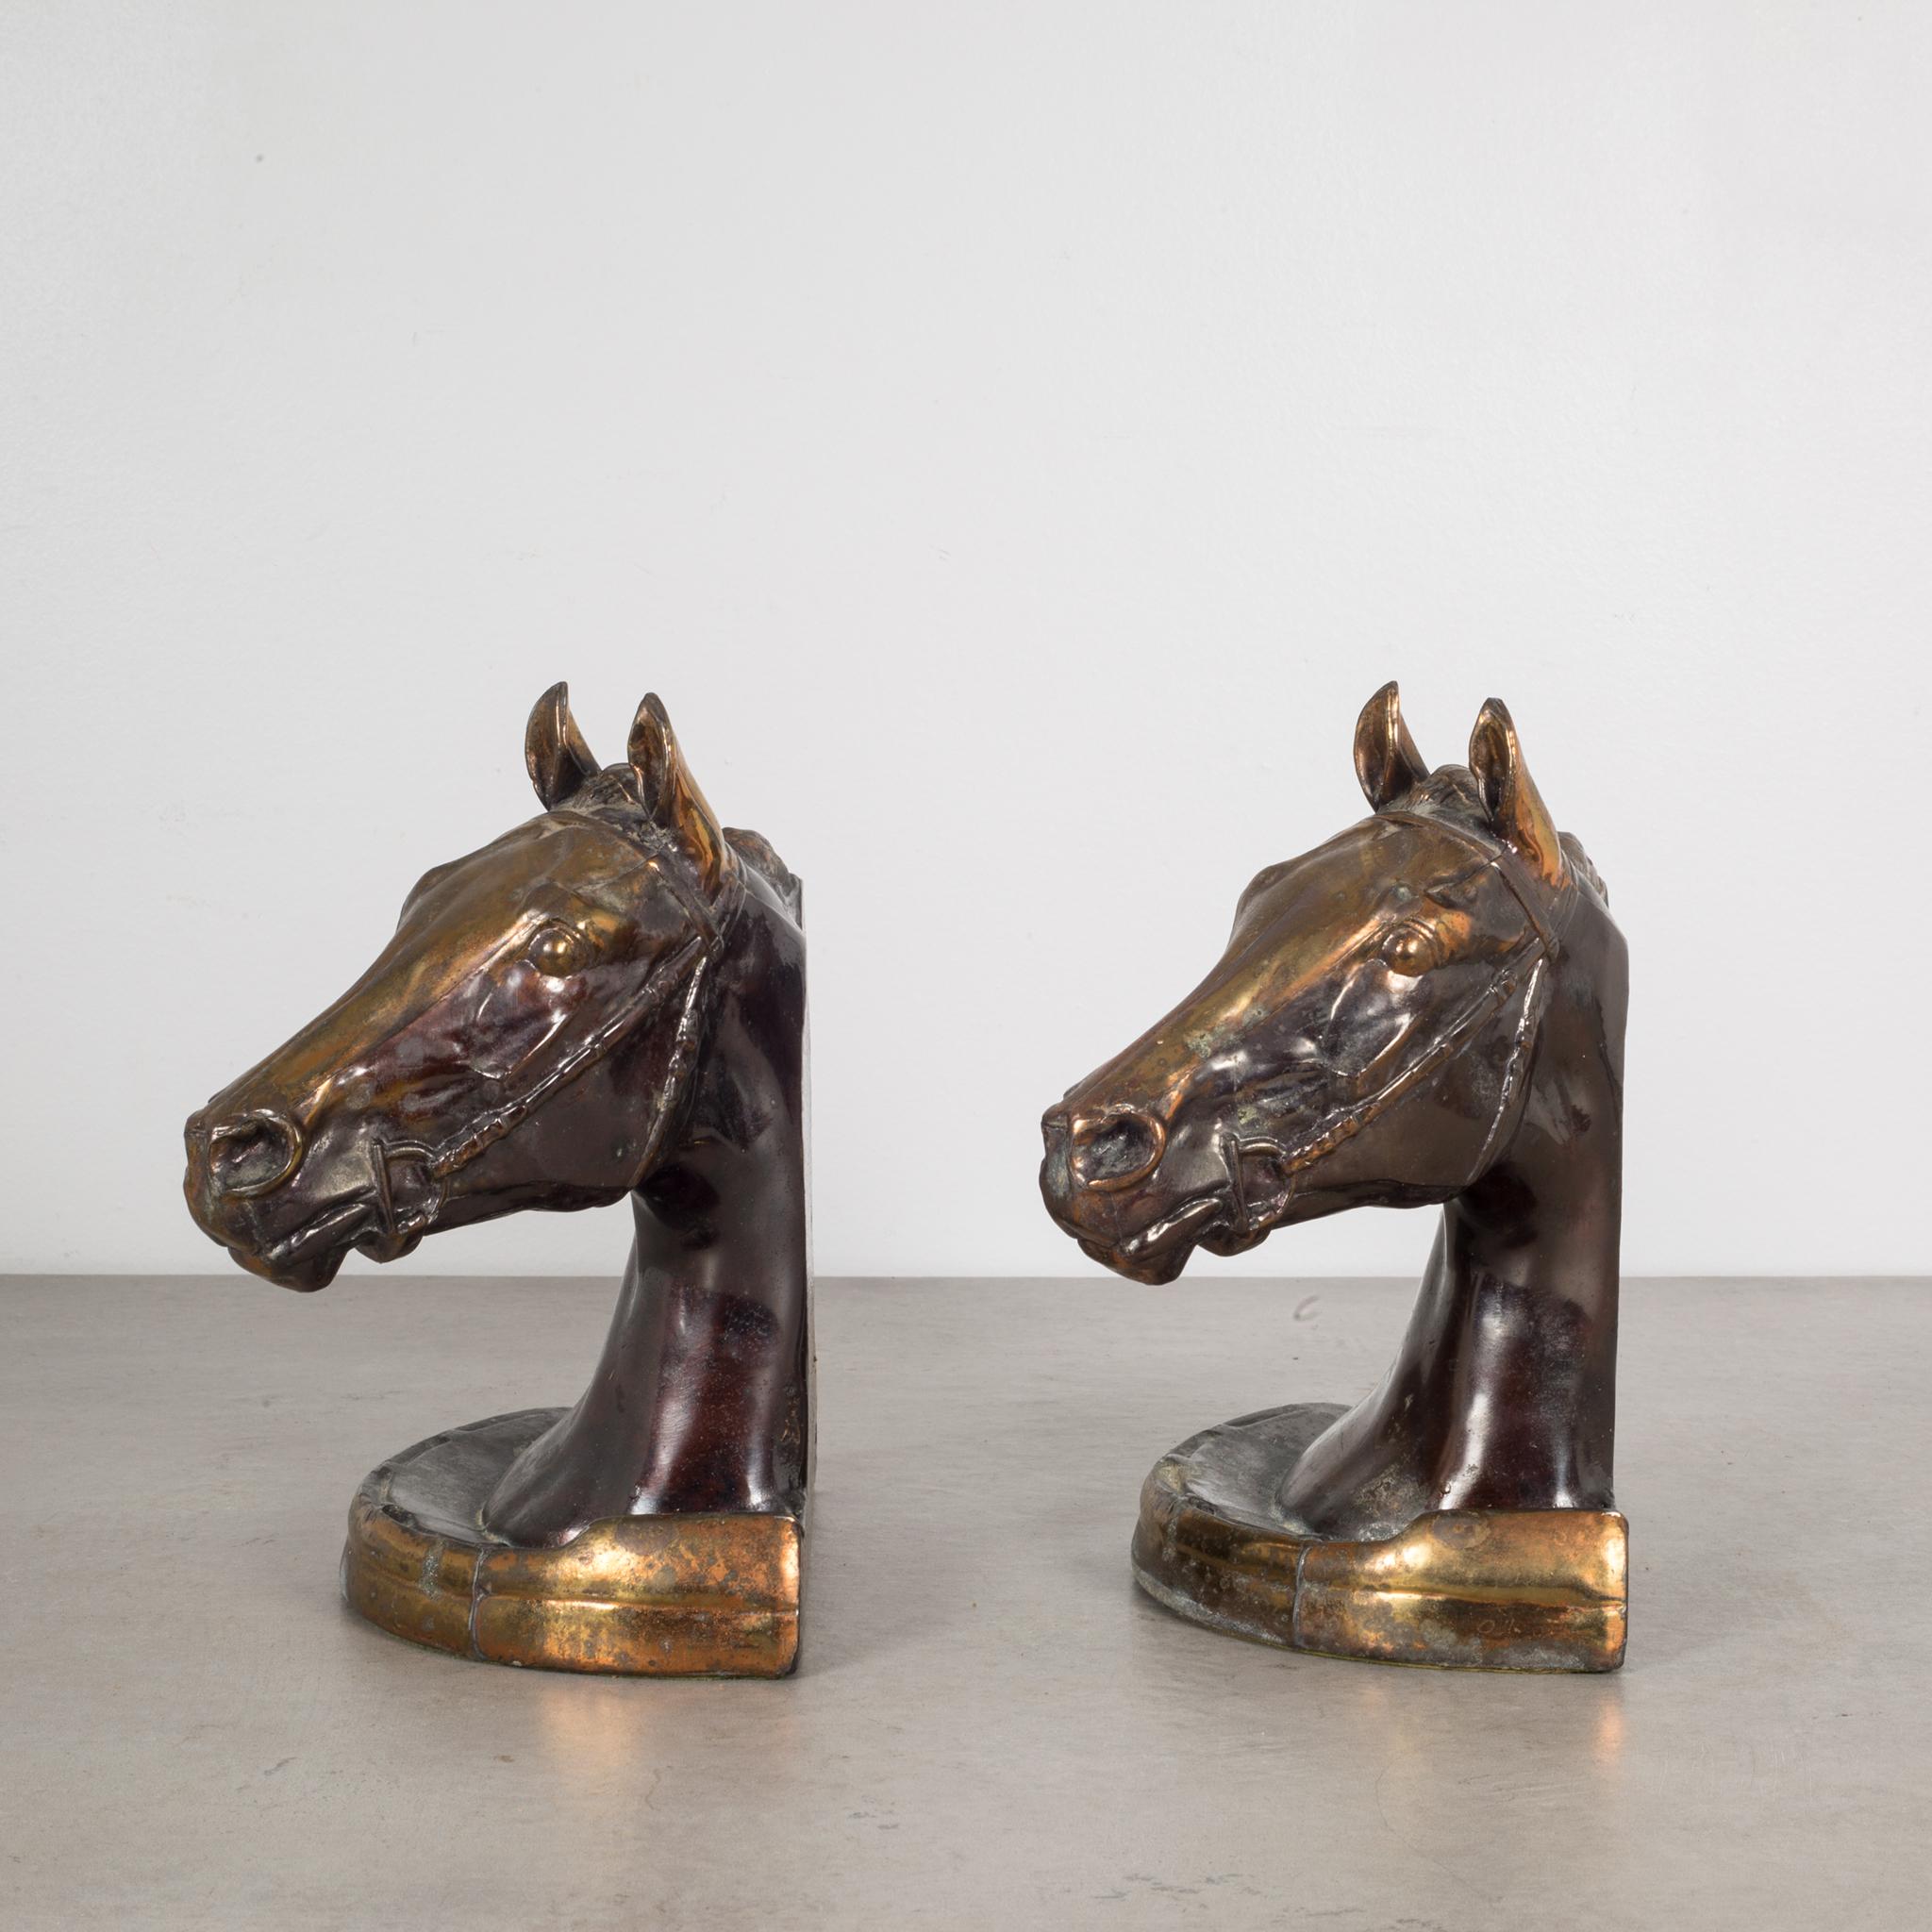 Art Deco Bronze Plated Horse Head Bookends by Glady's Brown and Dodge circa 1930